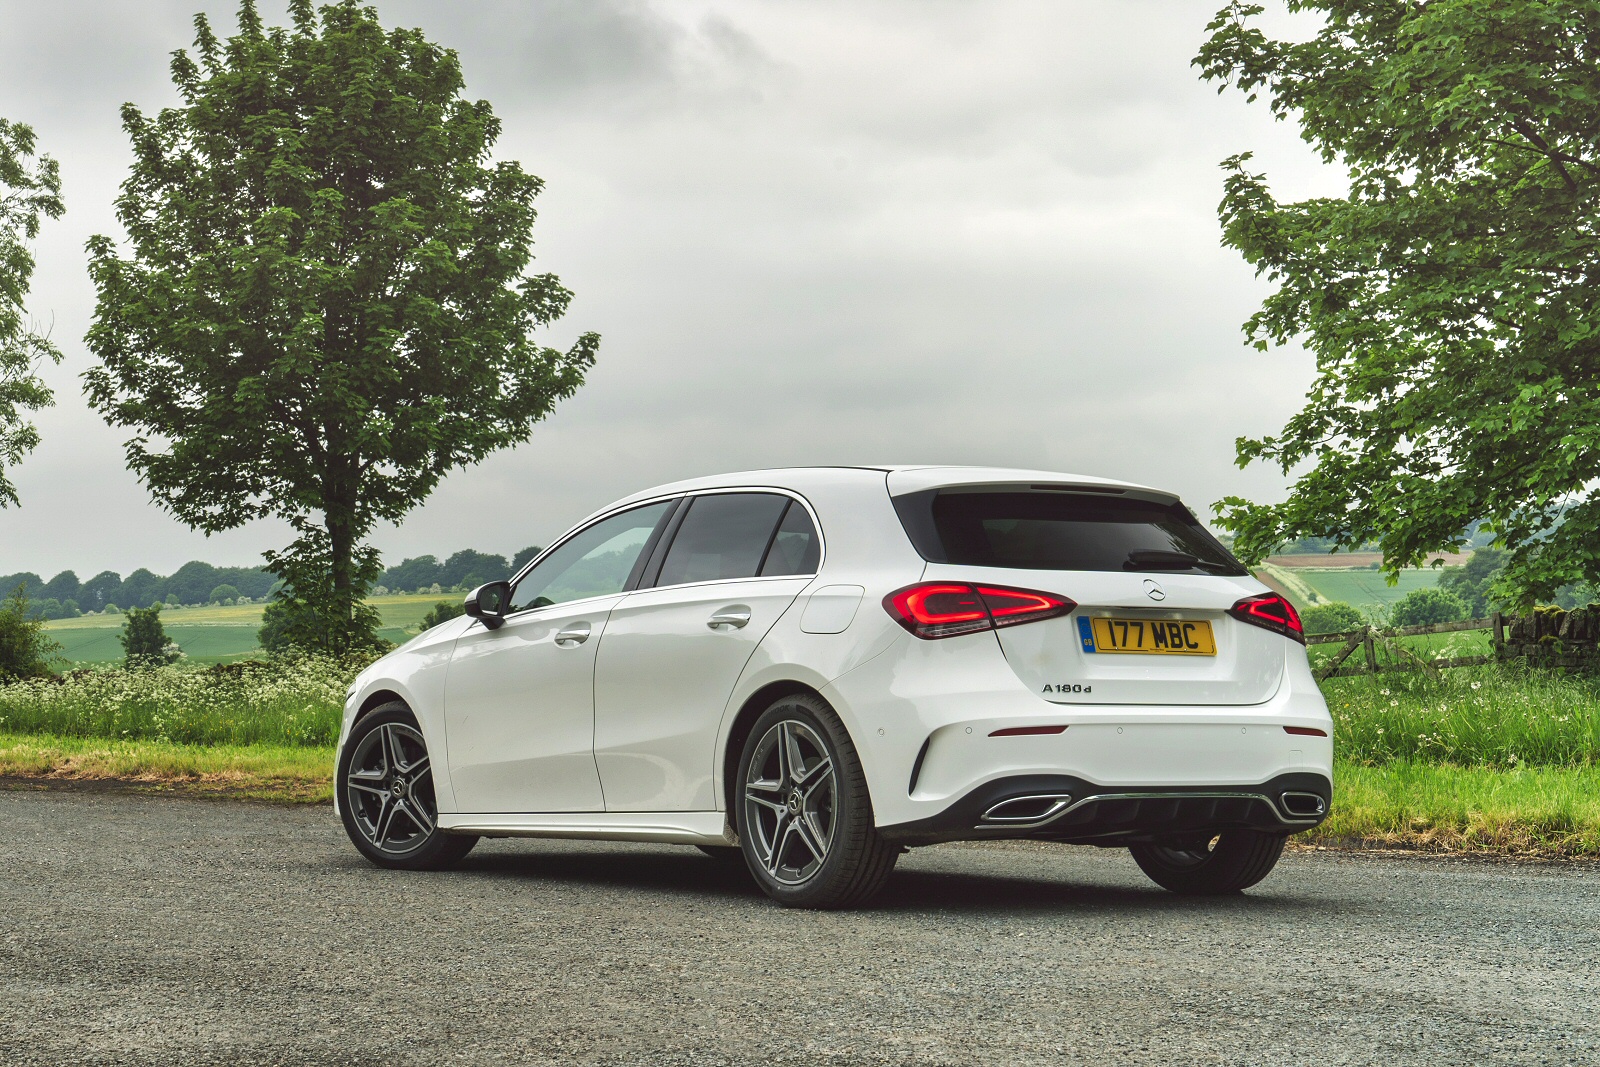 MERCEDES-BENZ A CLASS HATCHBACK SPECIAL EDITIONS A250 AMG Line Executive Edition 5dr Auto